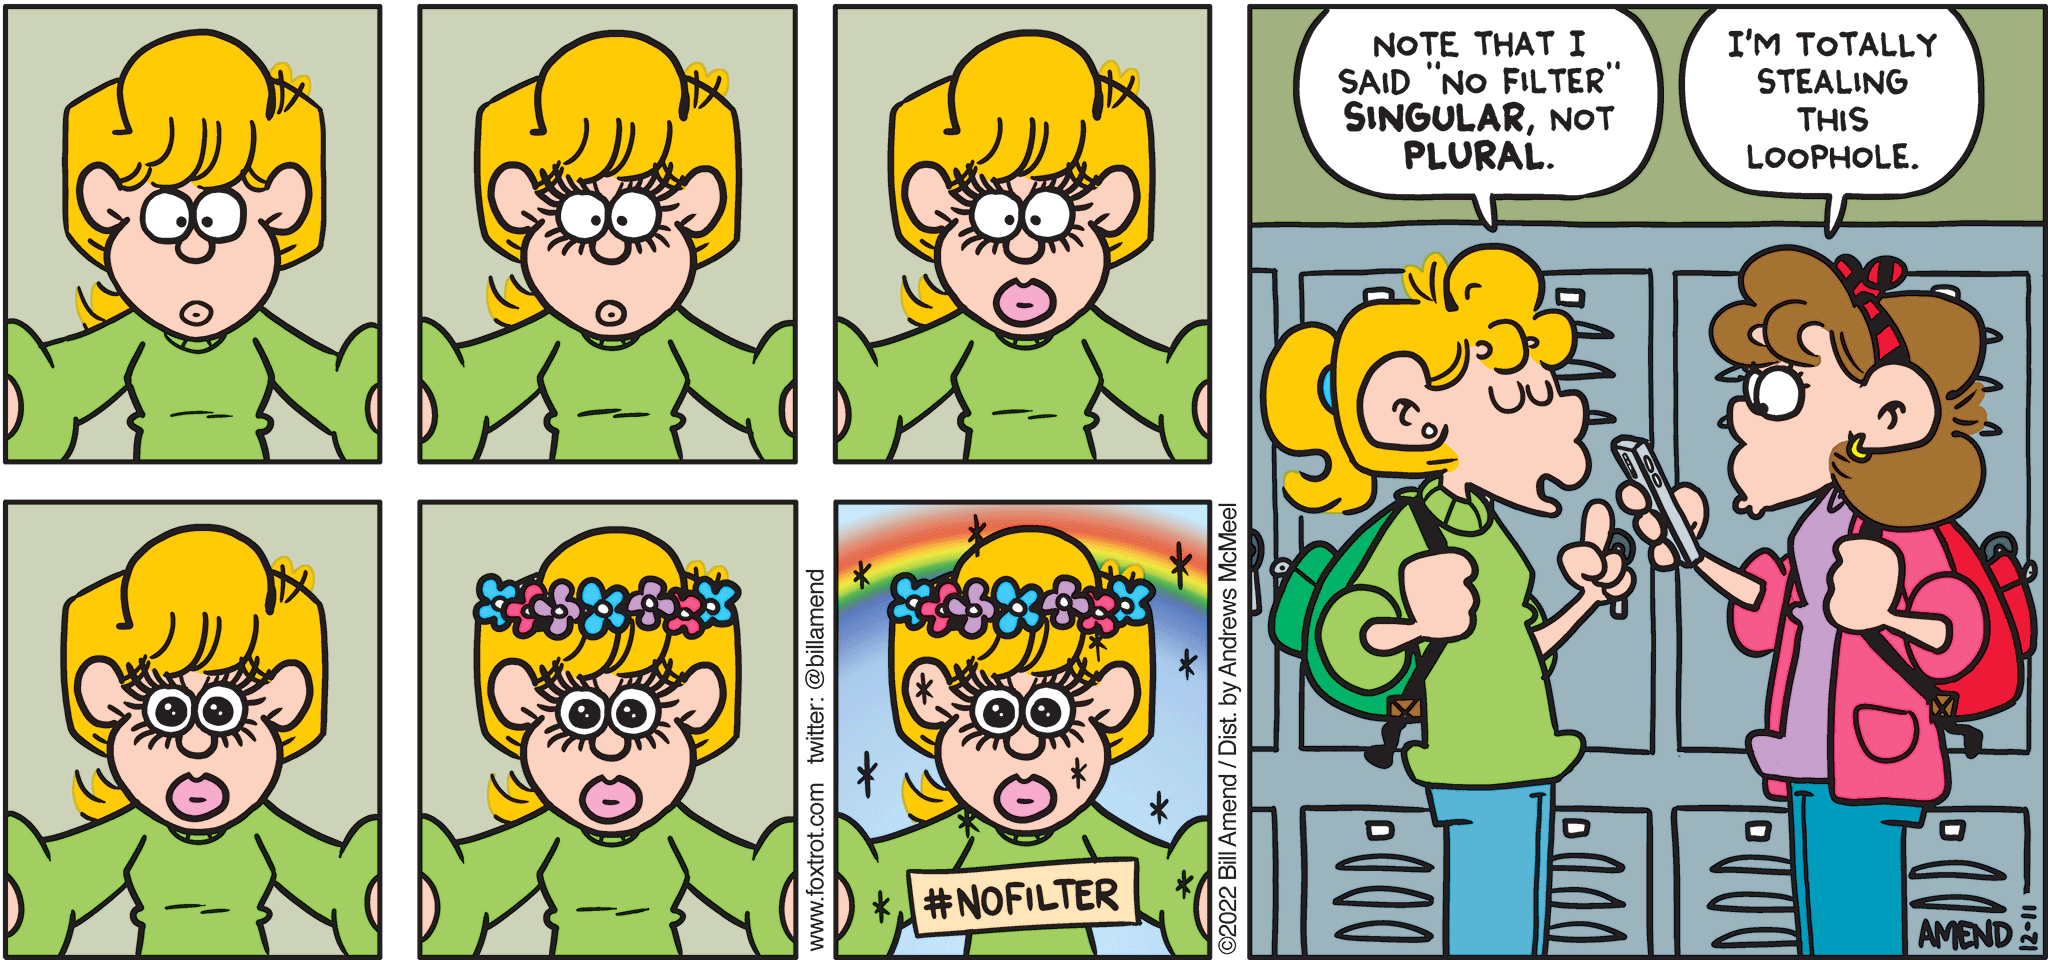 FoxTrot comic strip by Bill Amend - "Loophole" published December 11, 2022 - Transcript: Paige Fox: Note that I said "no filter" singular, not plural. Nicole: I'm totally stealing this loophole. 